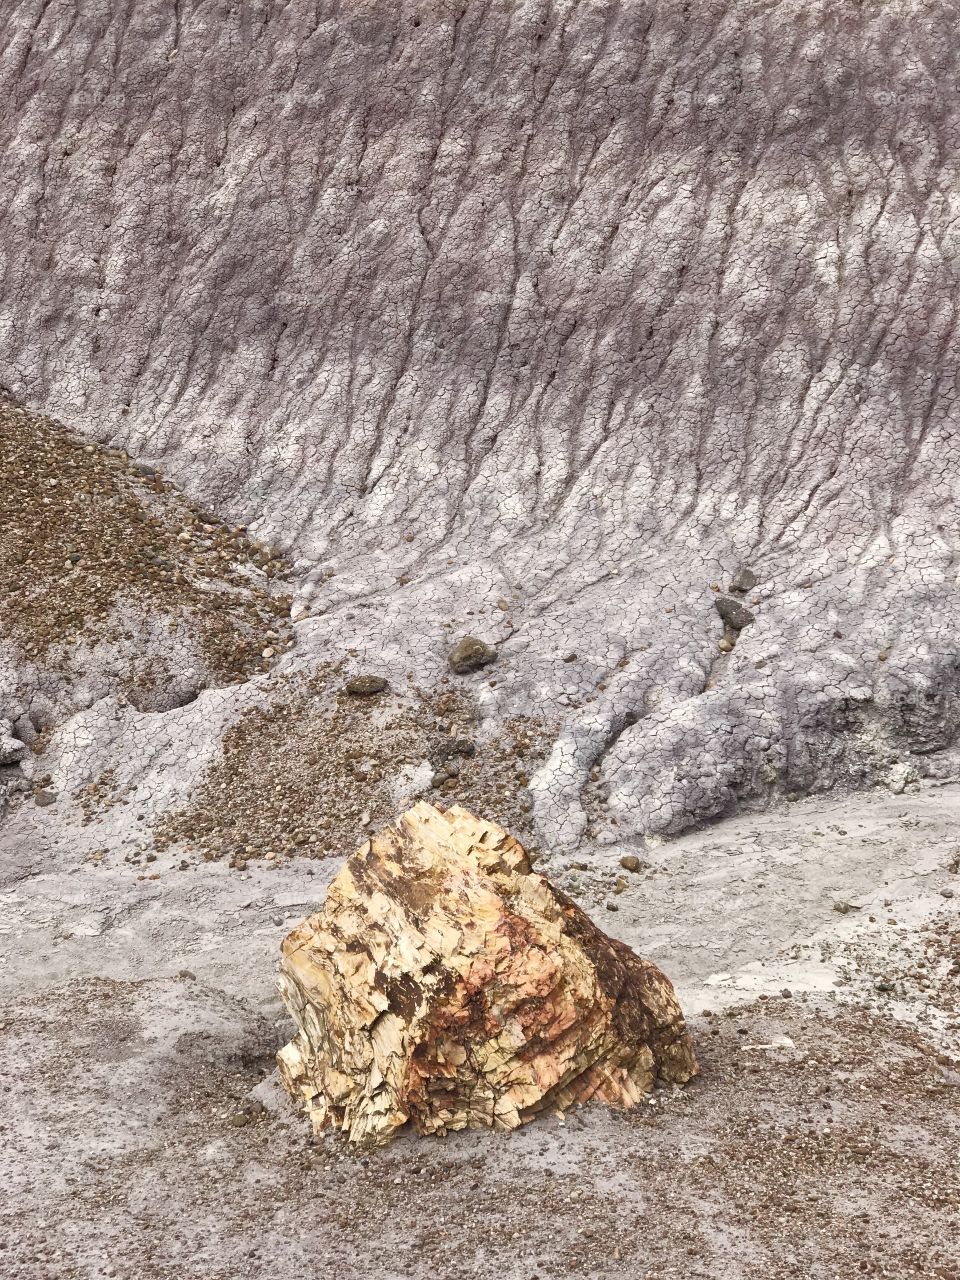 A petrified log at the base of a purple and white sandstone mountain in the Petrified Forest National Park 